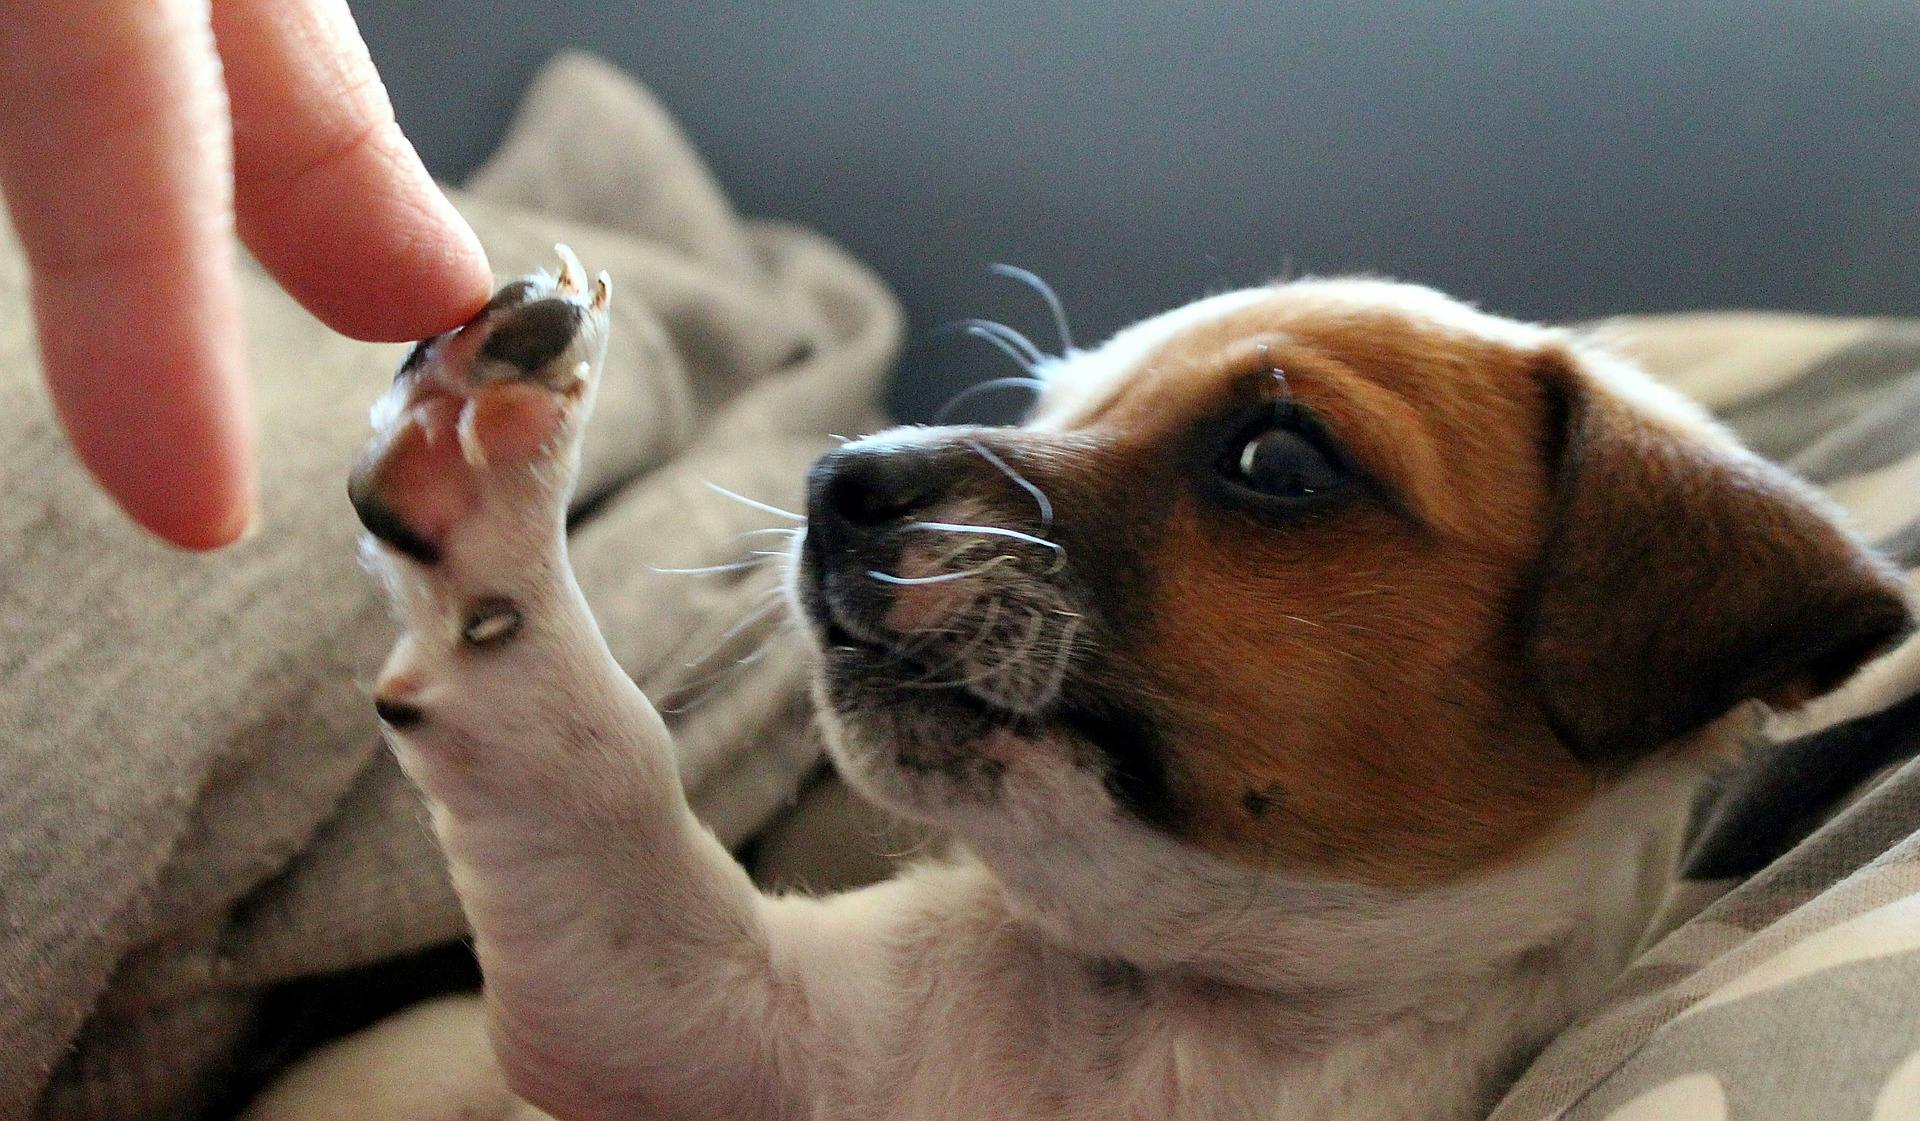 Brown and white puppy touching a person's finger with its paw.